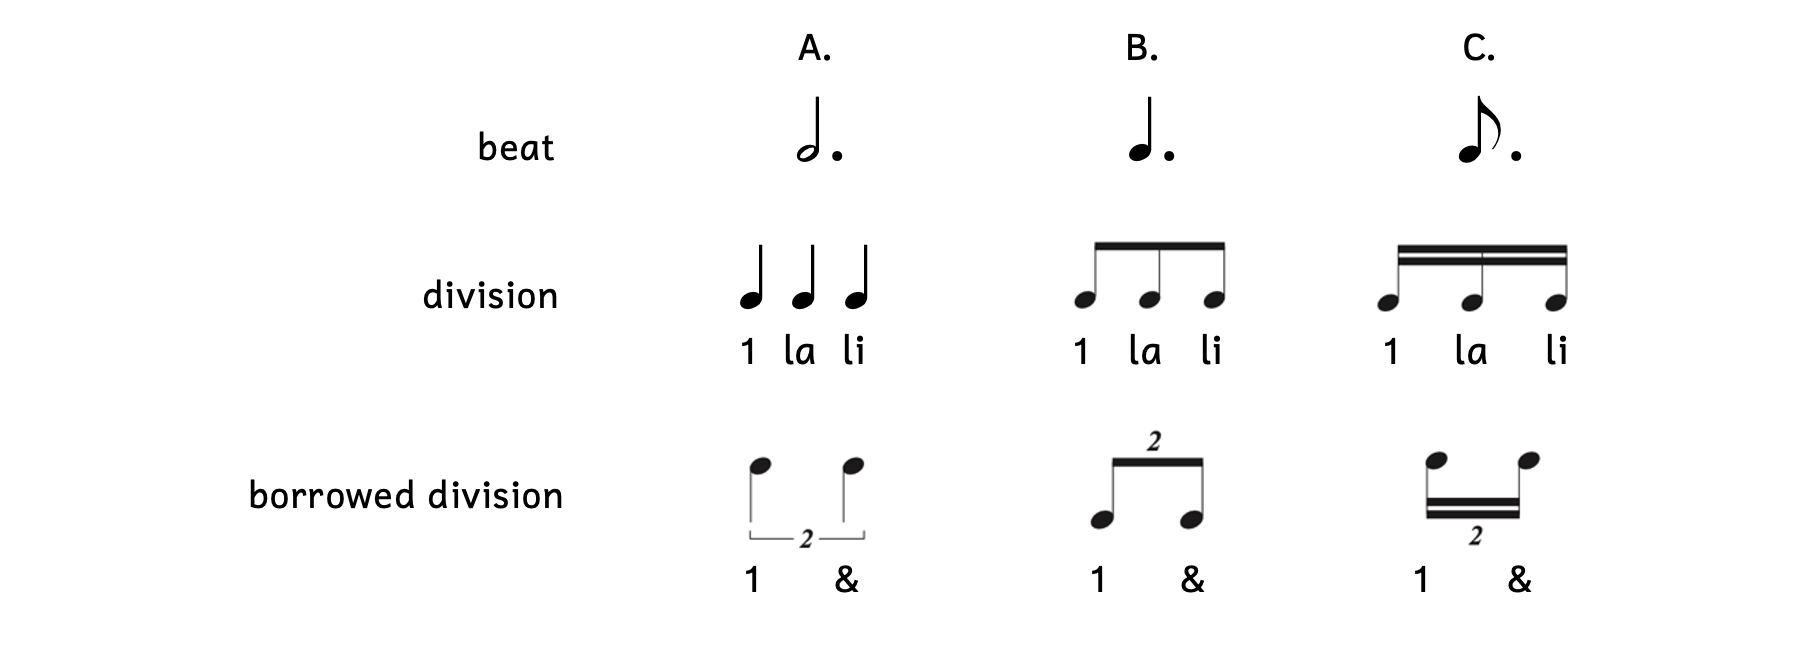 Examples of duplets. Column A shows a dotted half note beat; its division is three quarter notes which becomes two quarter note duplets. Column B shows a dotted quarter note beat; its division is three eighth notes which become two eighth note duplets. Column C shows a dotted eighth note beat; its division is three sixteenth notes which become two sixteenth note duplets. Counts have been added to the division and borrowed division.